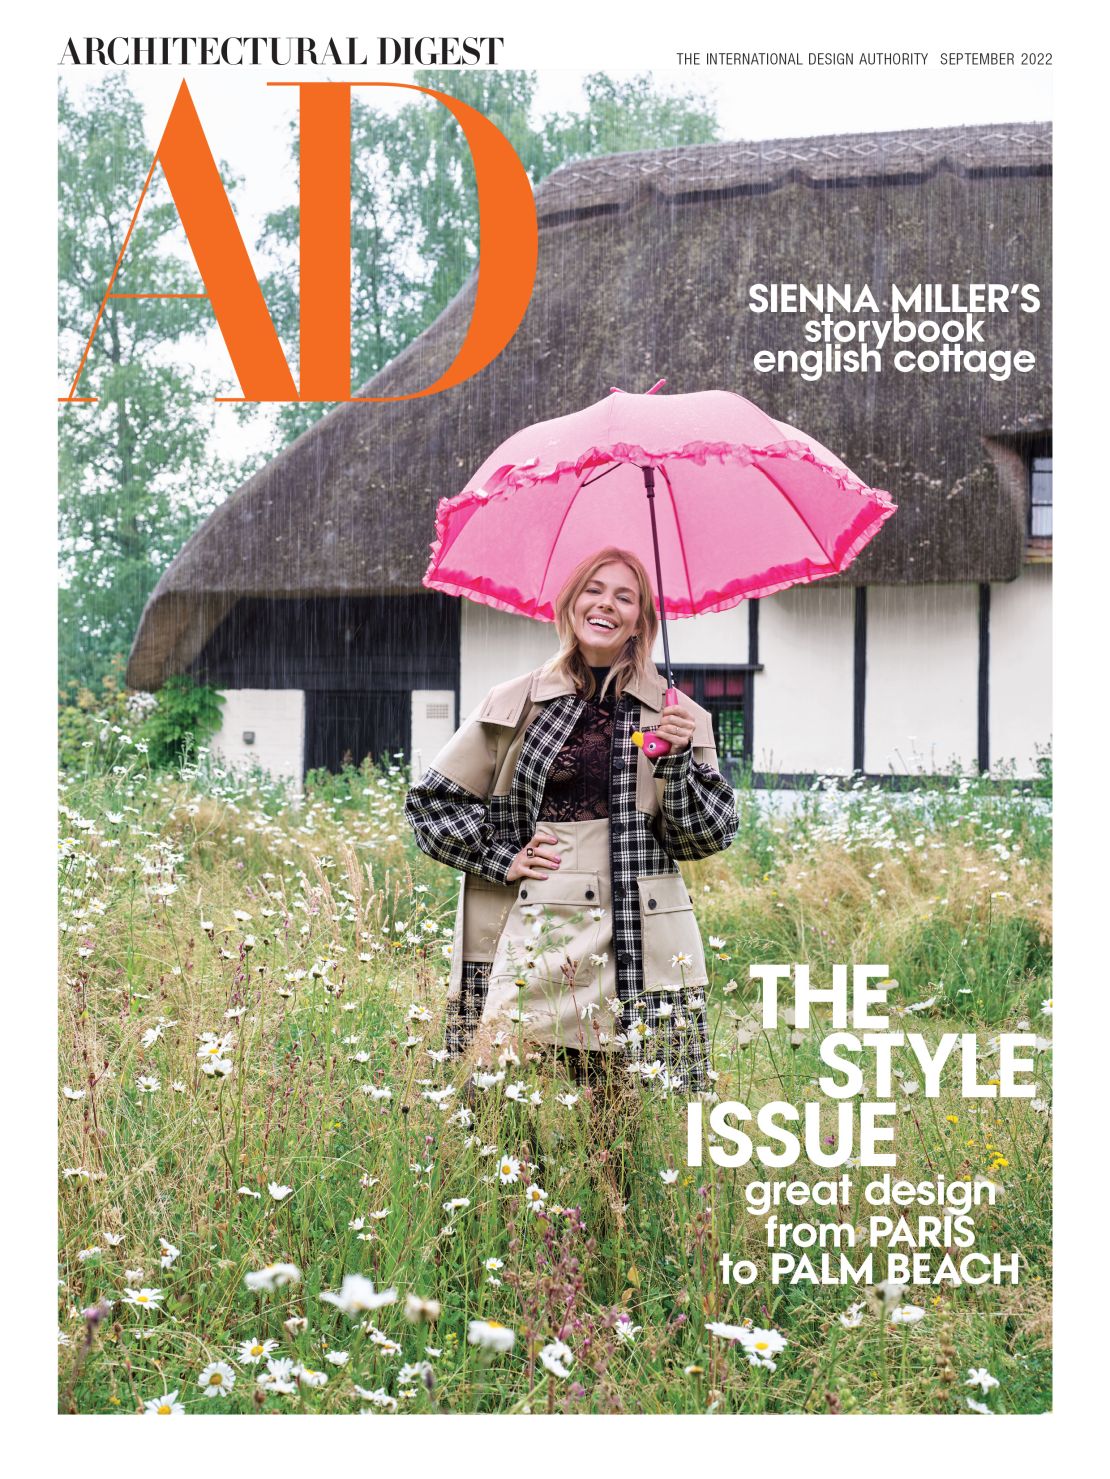 Sienna Miller is the coverstar for Architectural Digest's September Style issue this year.